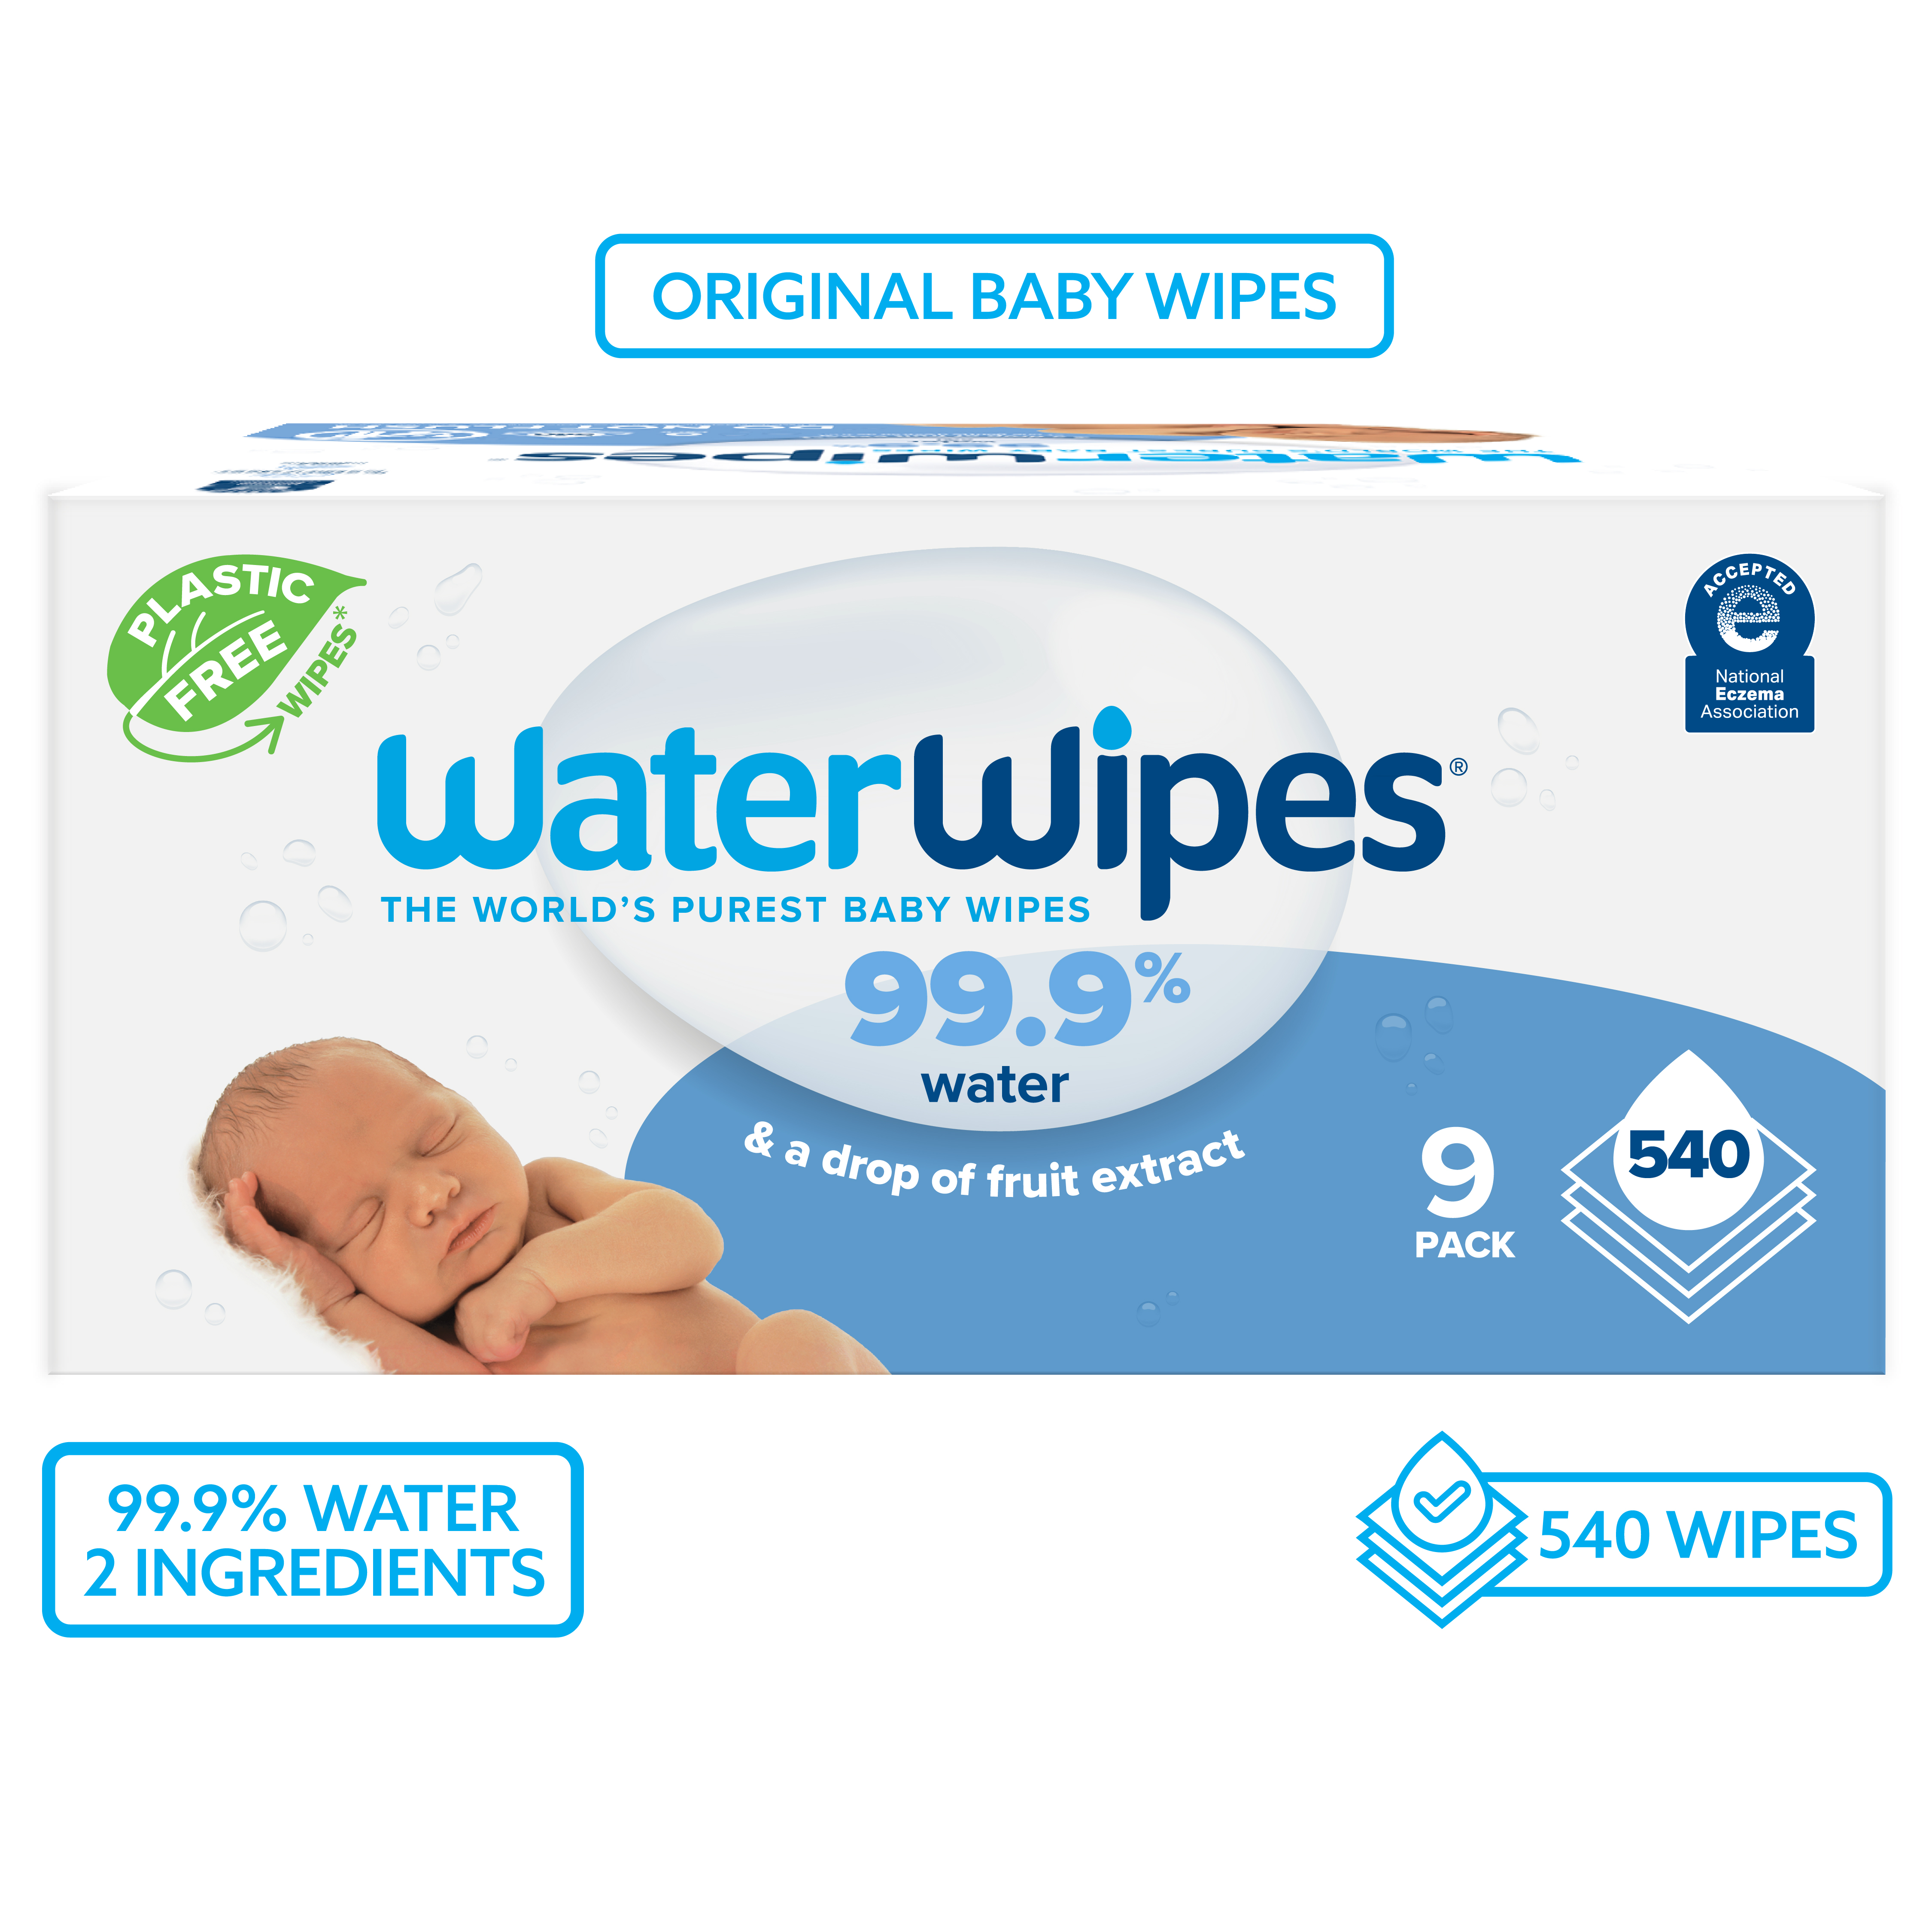 WaterWipes Plastic-Free Original 99.9% Water Based Baby Wipes, Fragrance-Free for Sensitive Skin, 540 Count (9 Packs) - image 2 of 10